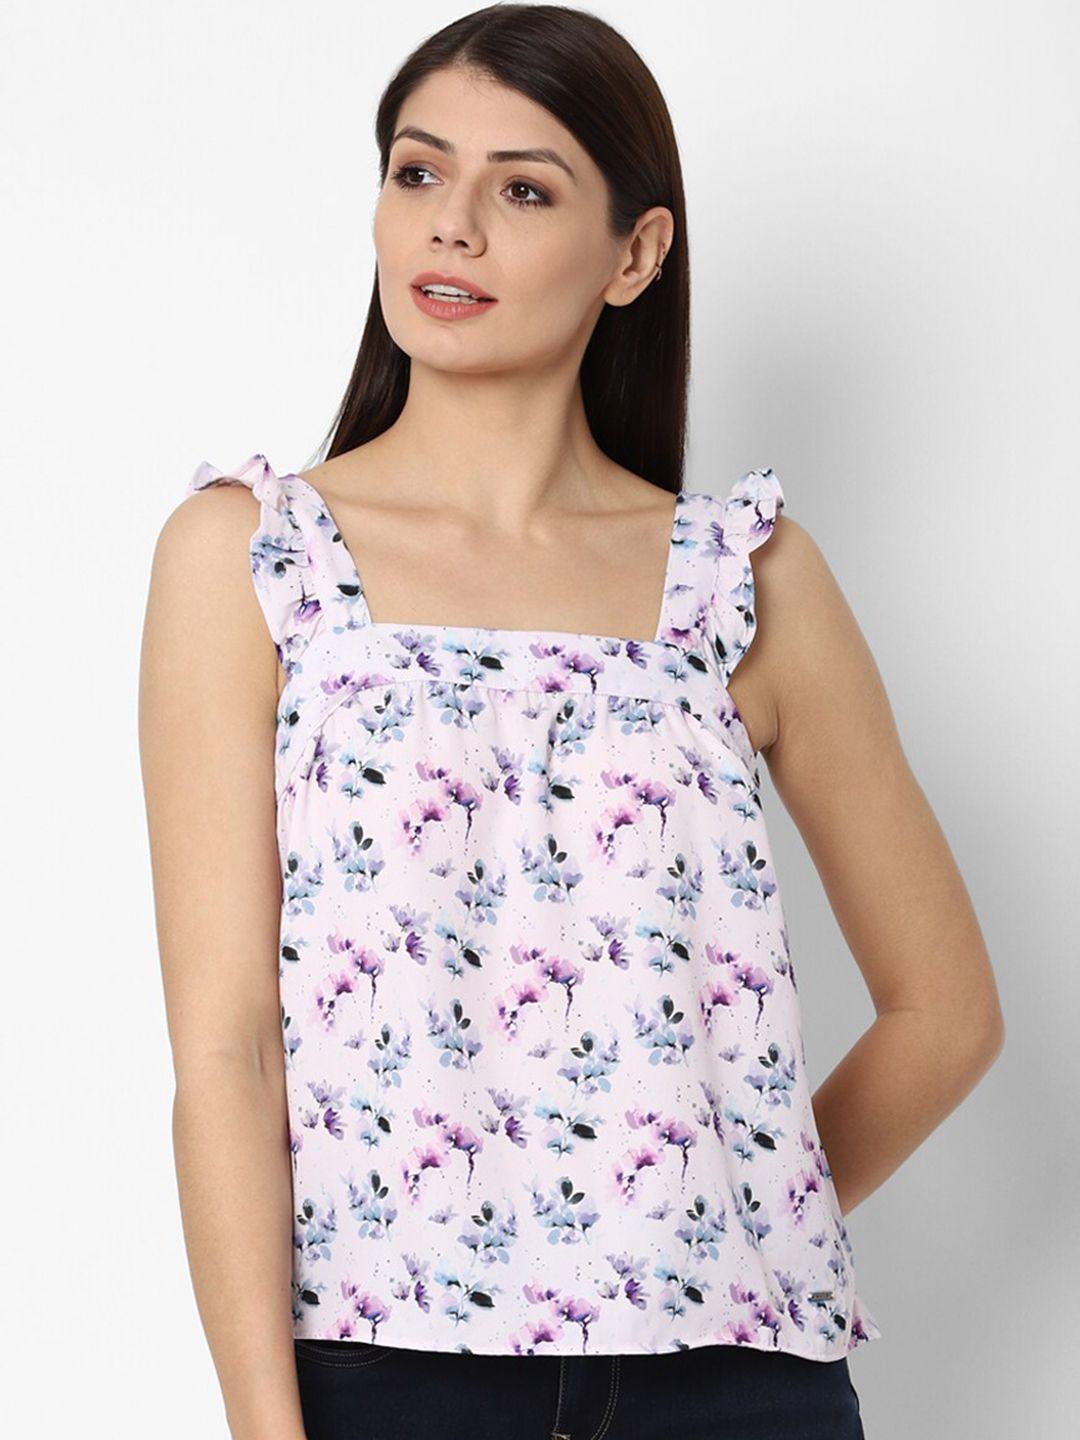 allen solly woman pink floral print top